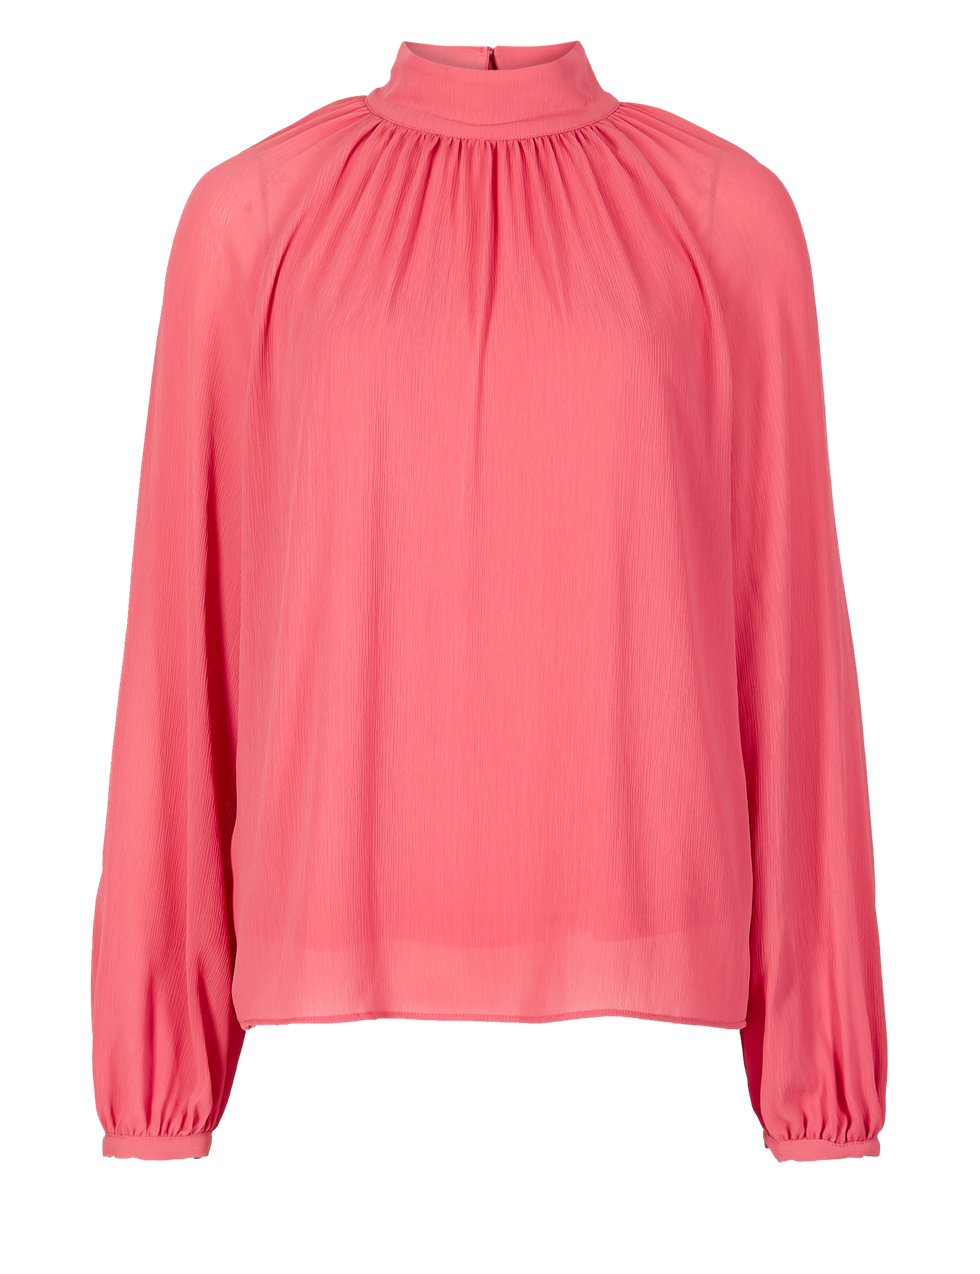 Clothing, Pink, Sleeve, Neck, Outerwear, Blouse, Shoulder, Magenta, Collar, Top, 